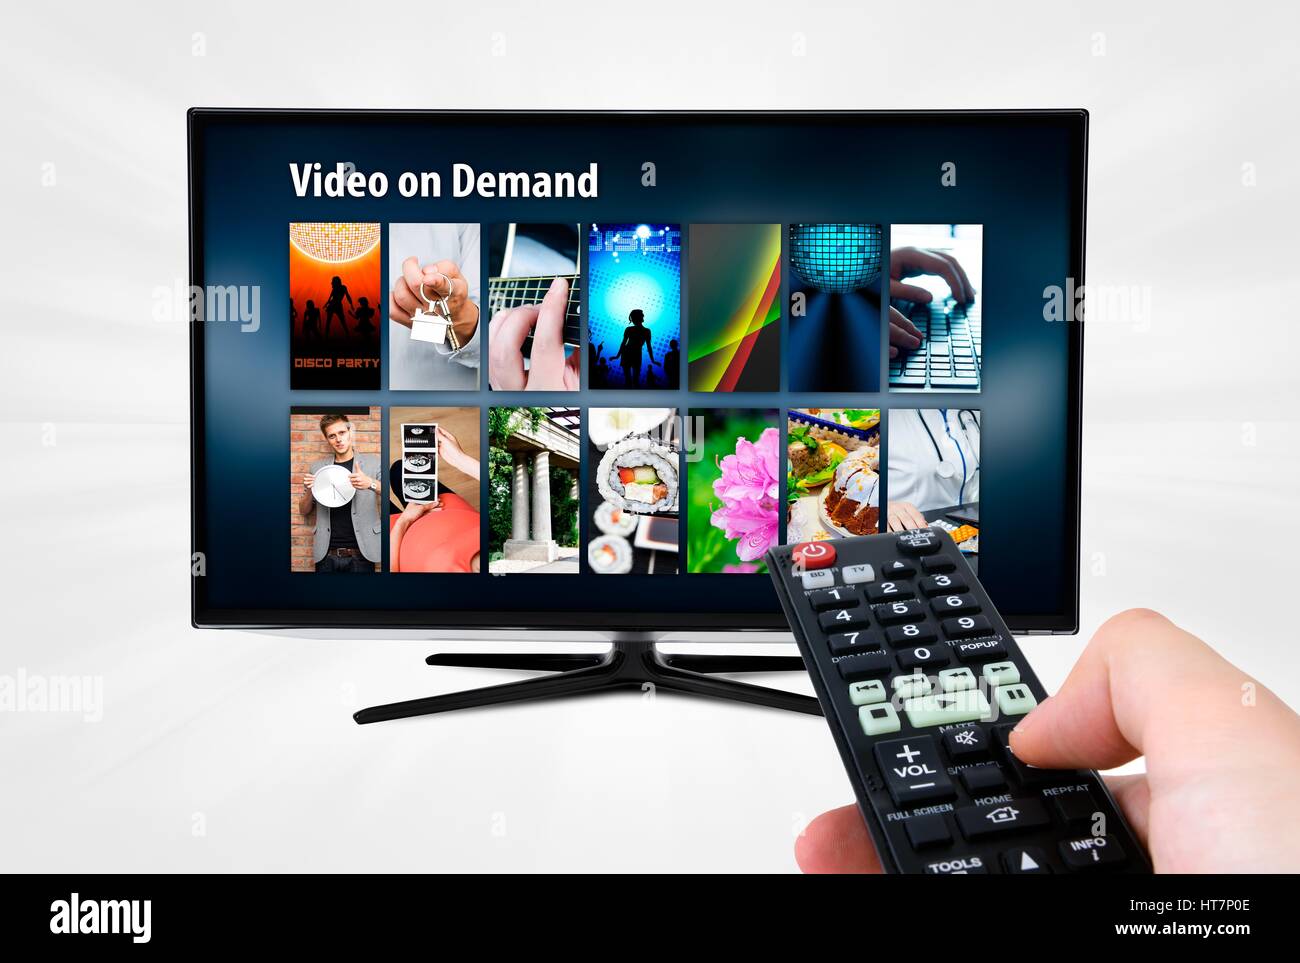 Video on demand VOD service on smart TV. Remote control in hand Stock Photo  - Alamy